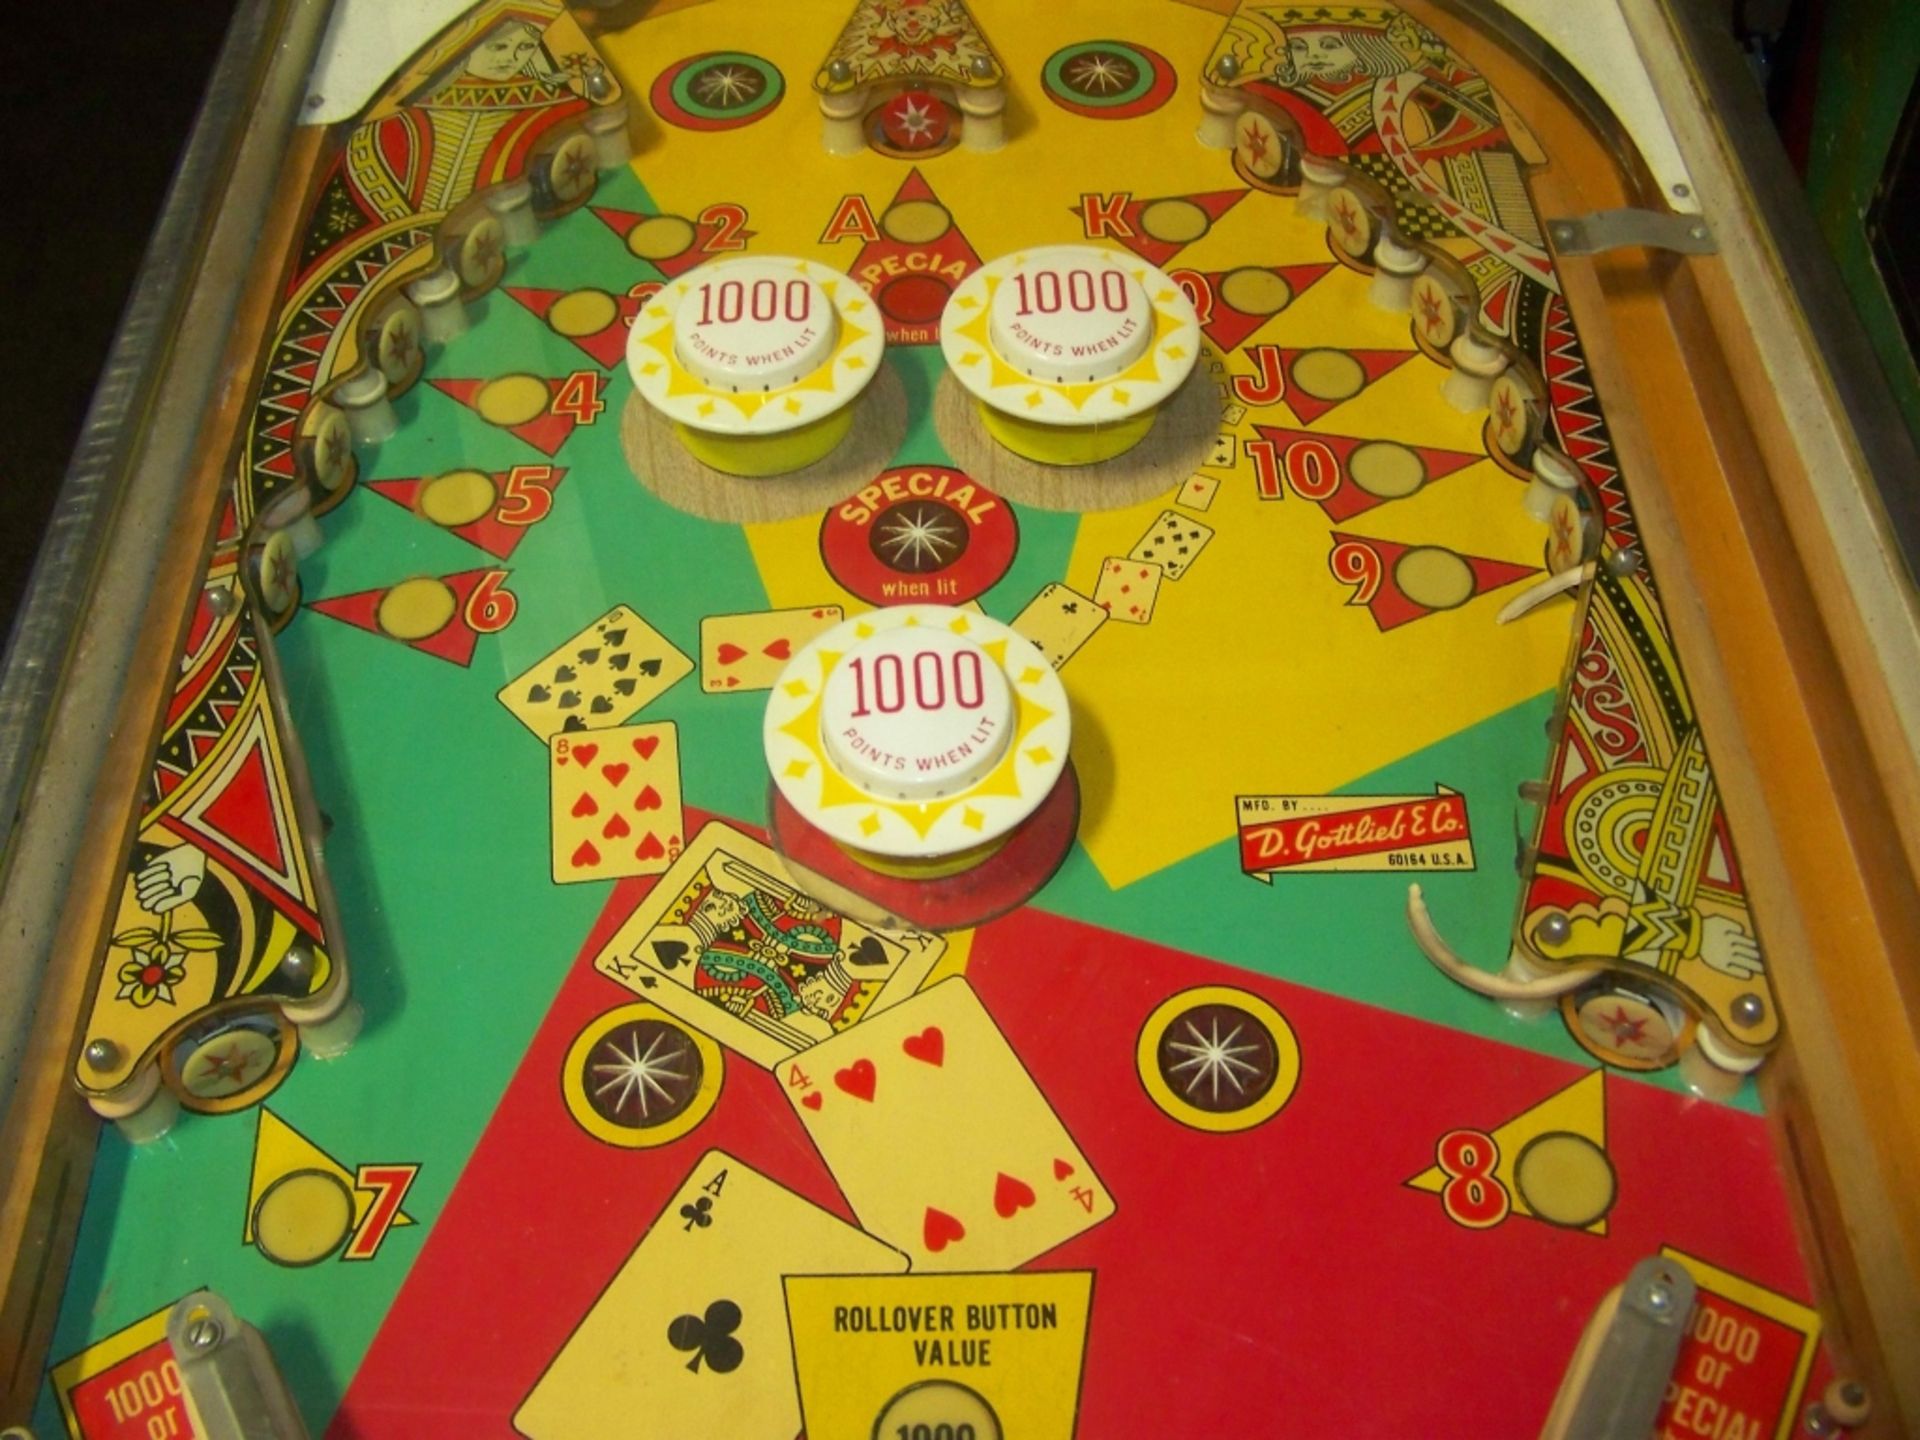 TOP CARD PINBALL MACHINE GOTTLIEB 1974 Item is in used condition. Evidence of wear and commercial - Image 4 of 4